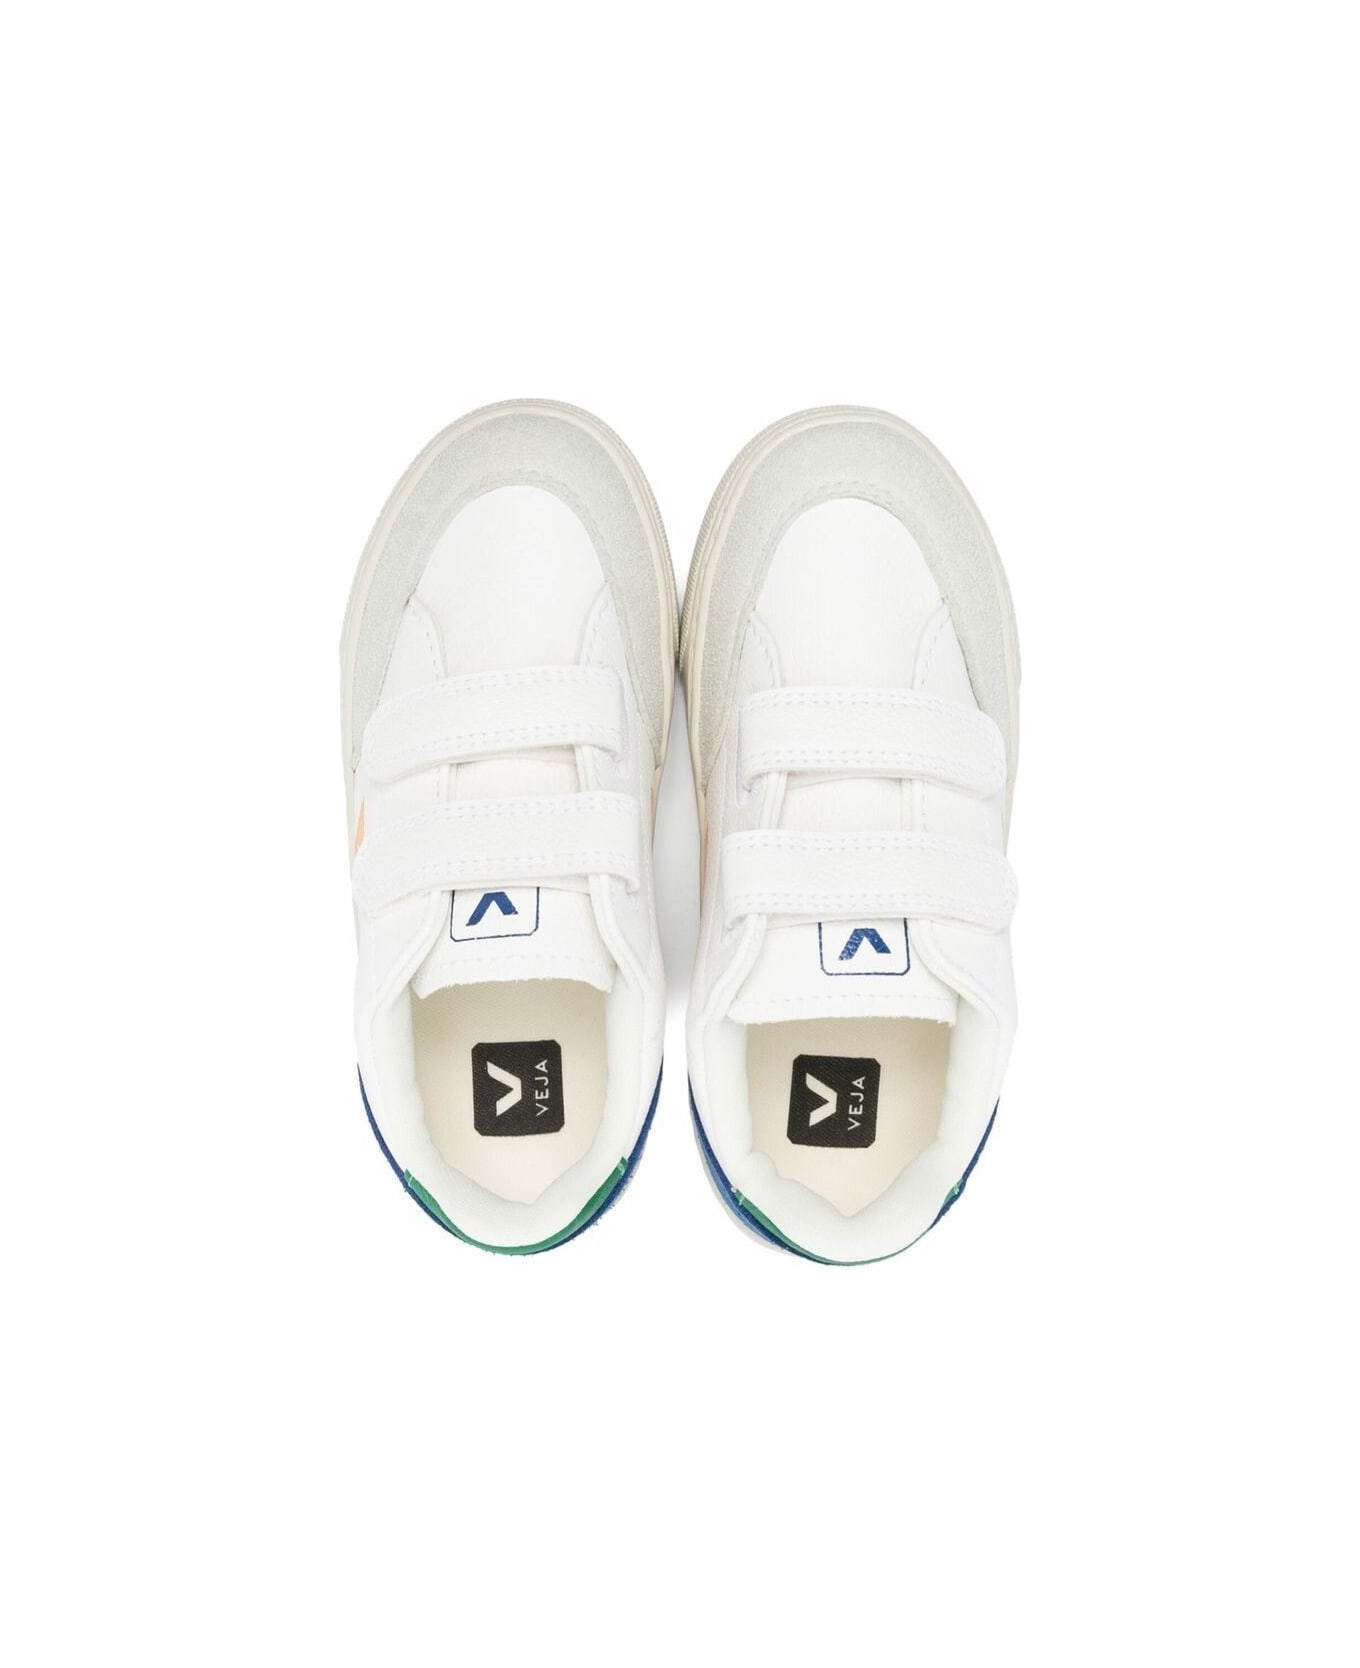 Veja White Sneakers V-12 With Touch Strap In White Leather Kids - Multicolor シューズ